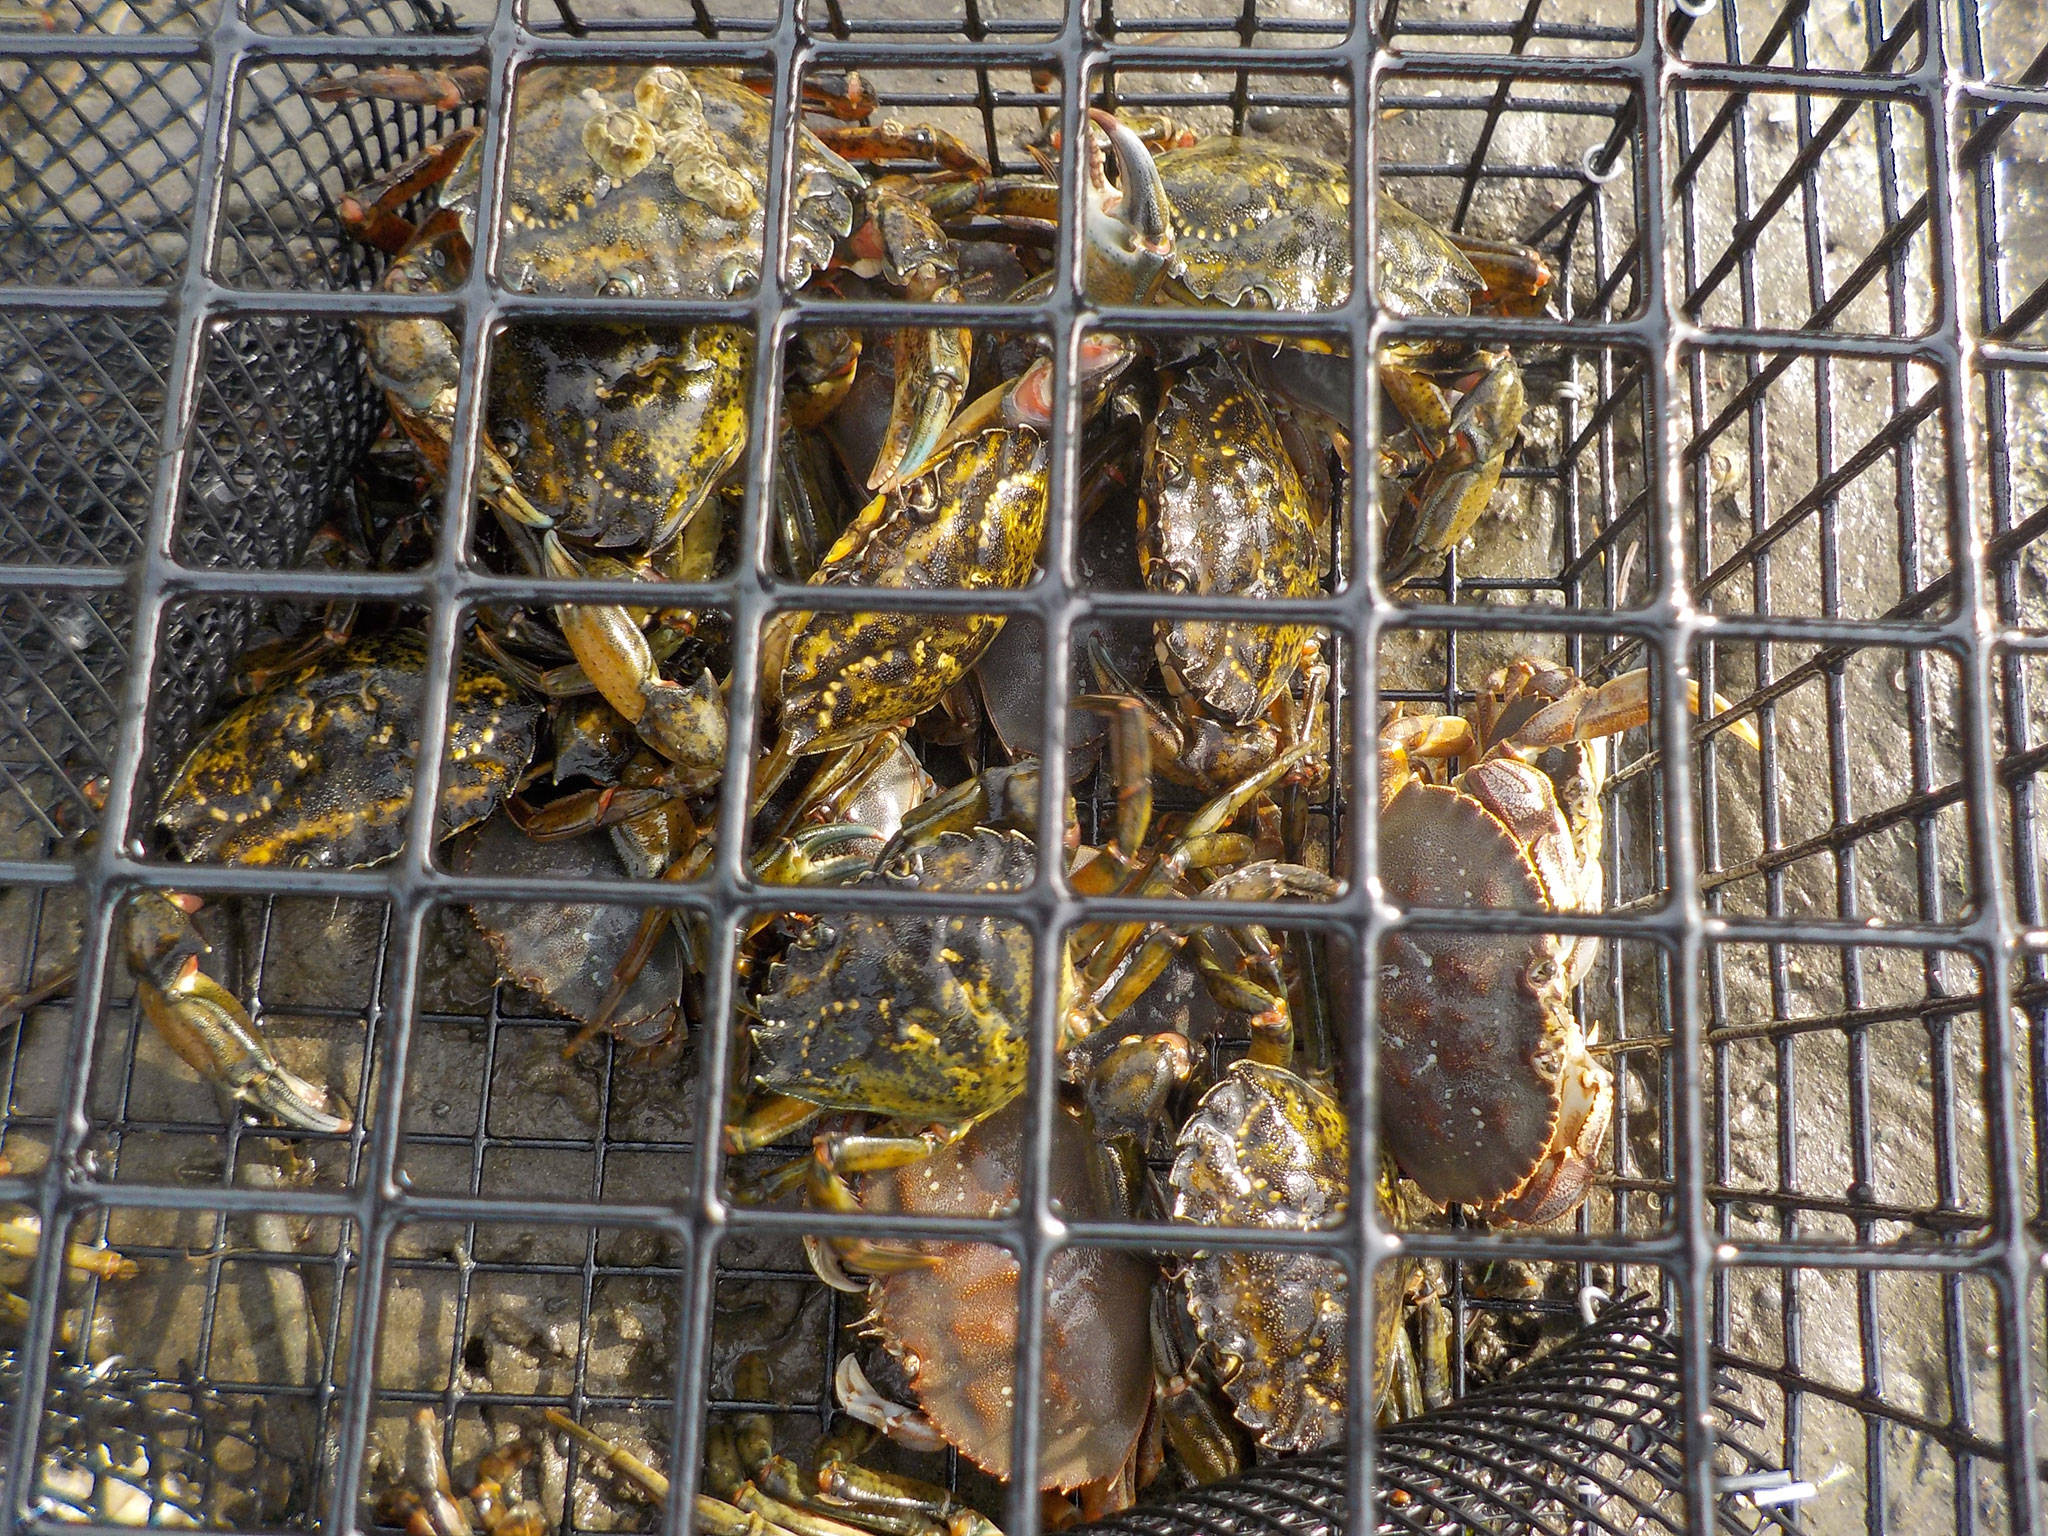 Green crab trapping on hold across Western Washington